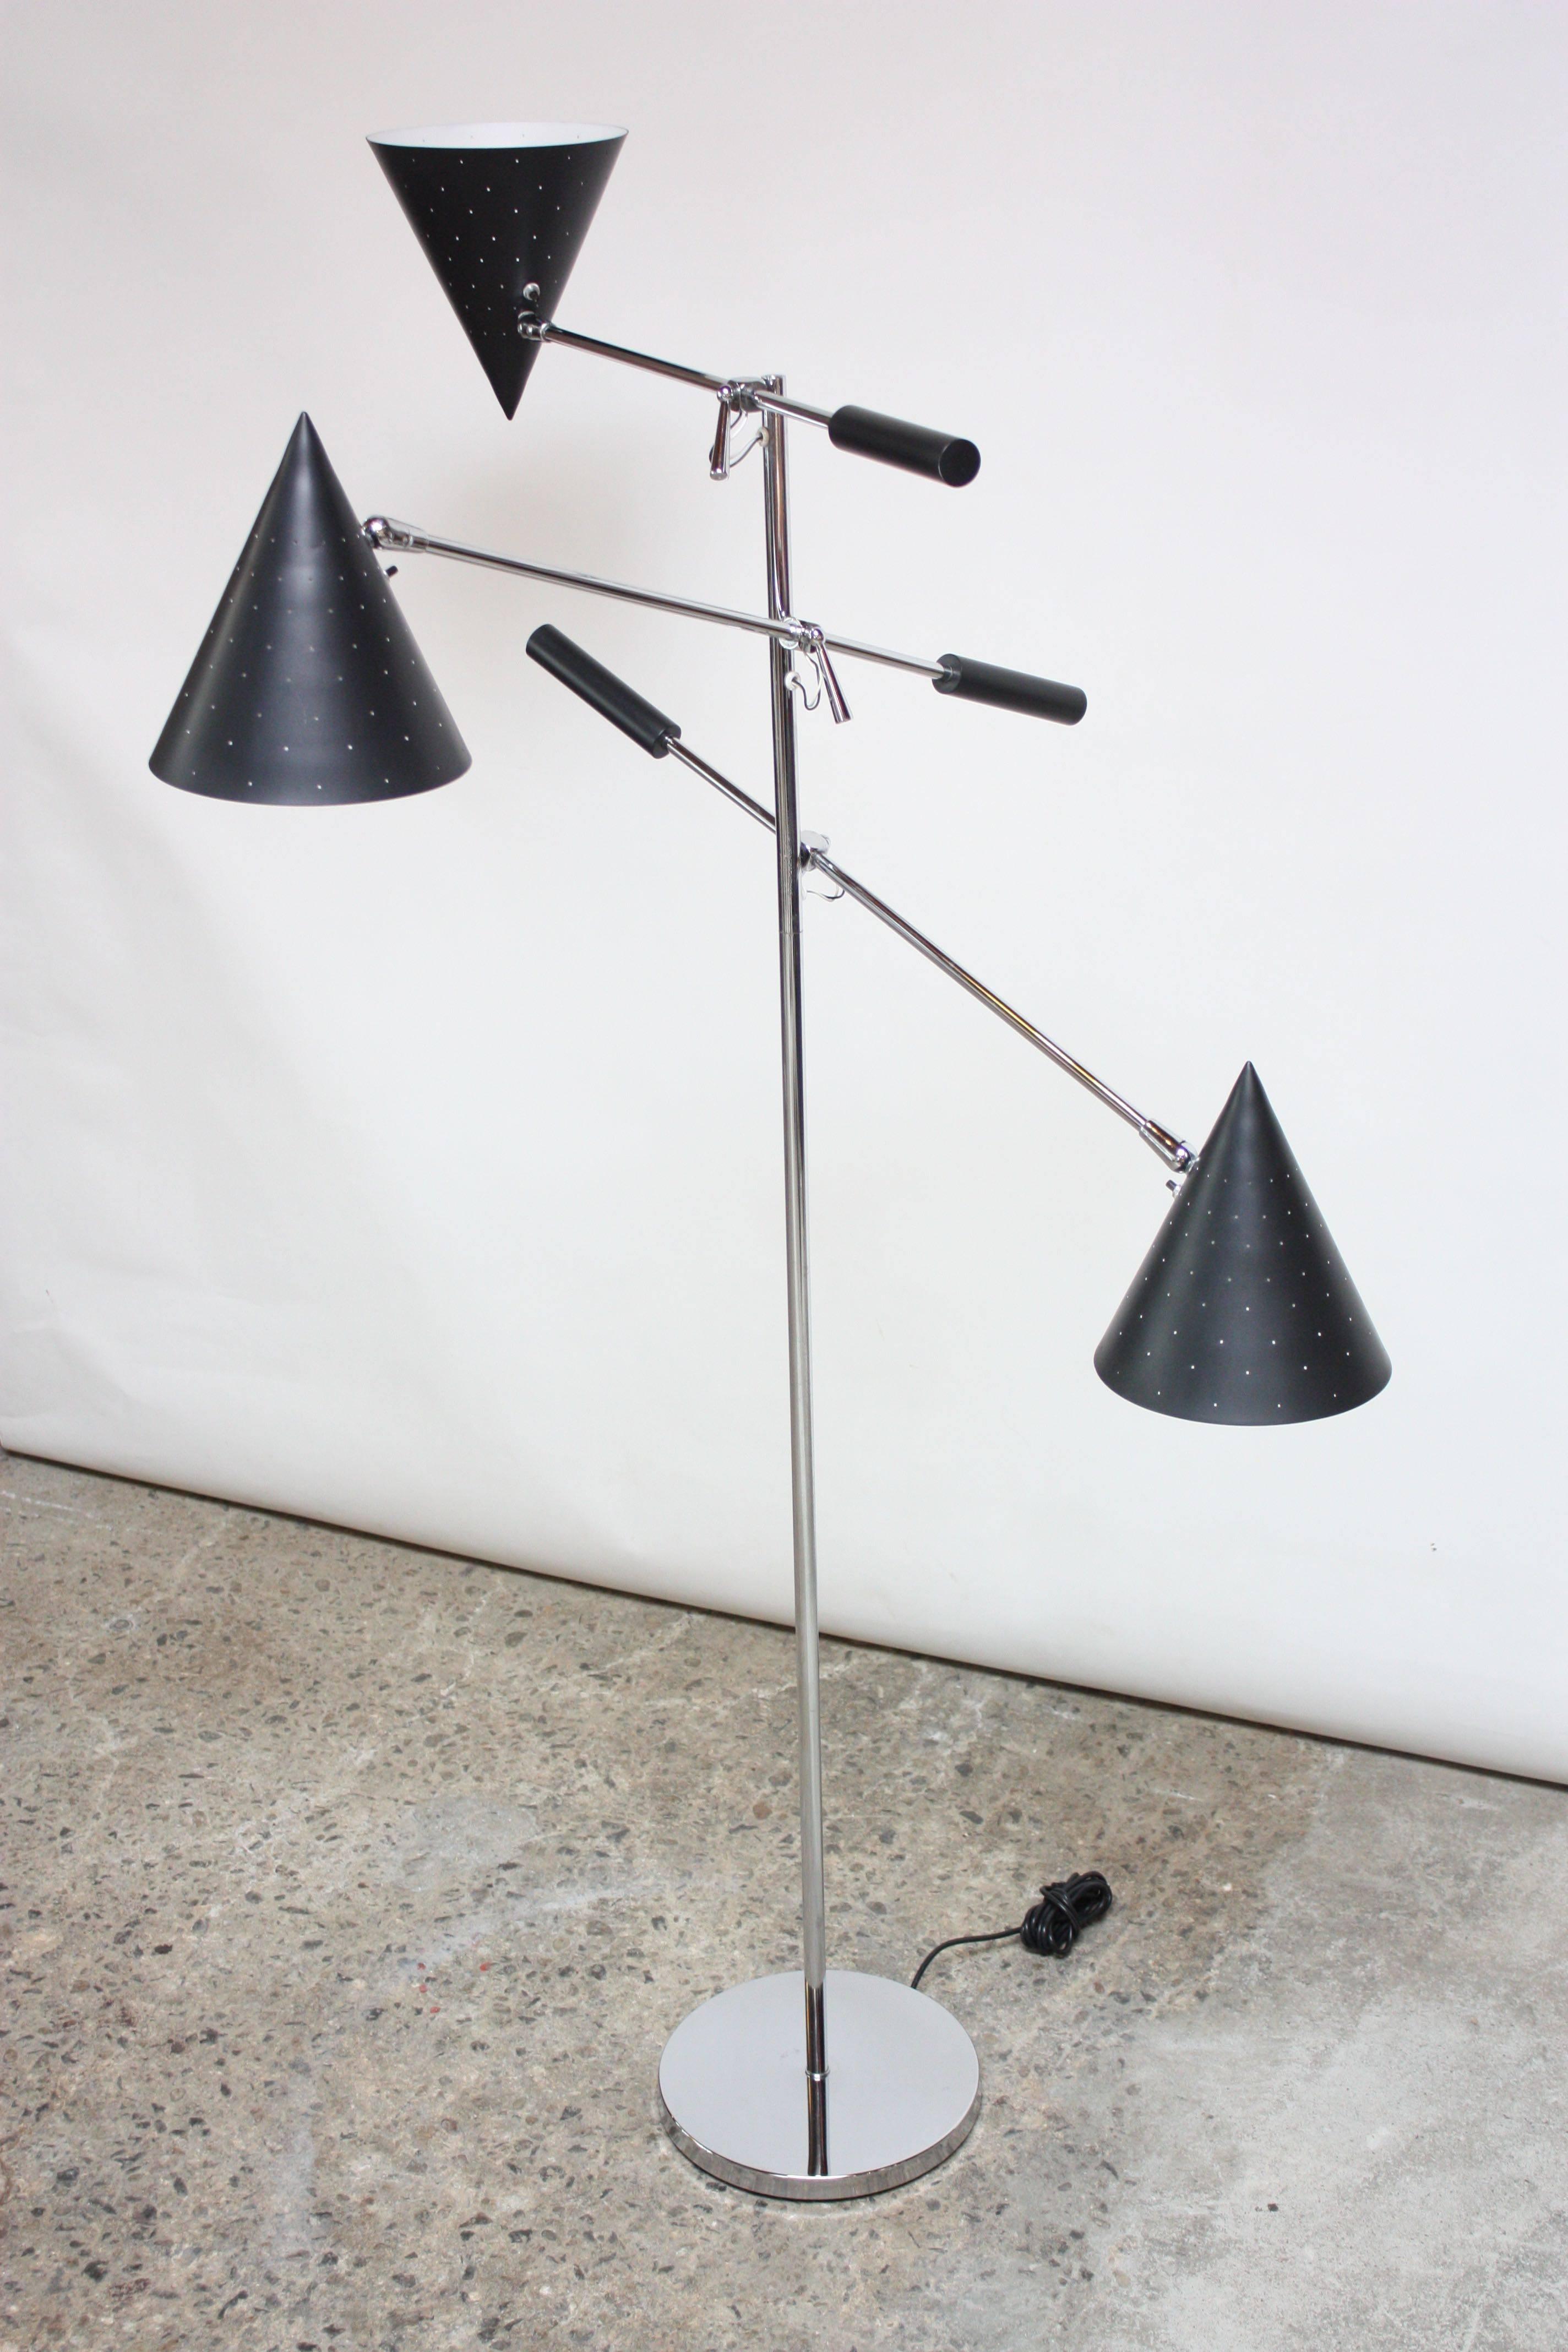 Striking three-fixture floor lamp manufactured by Lightolier in the 1950s. Composed of three conical, perforated shades in black mounted to chrome arms with counter weights which attach to a chromed stem and round base. Shades and arms offer